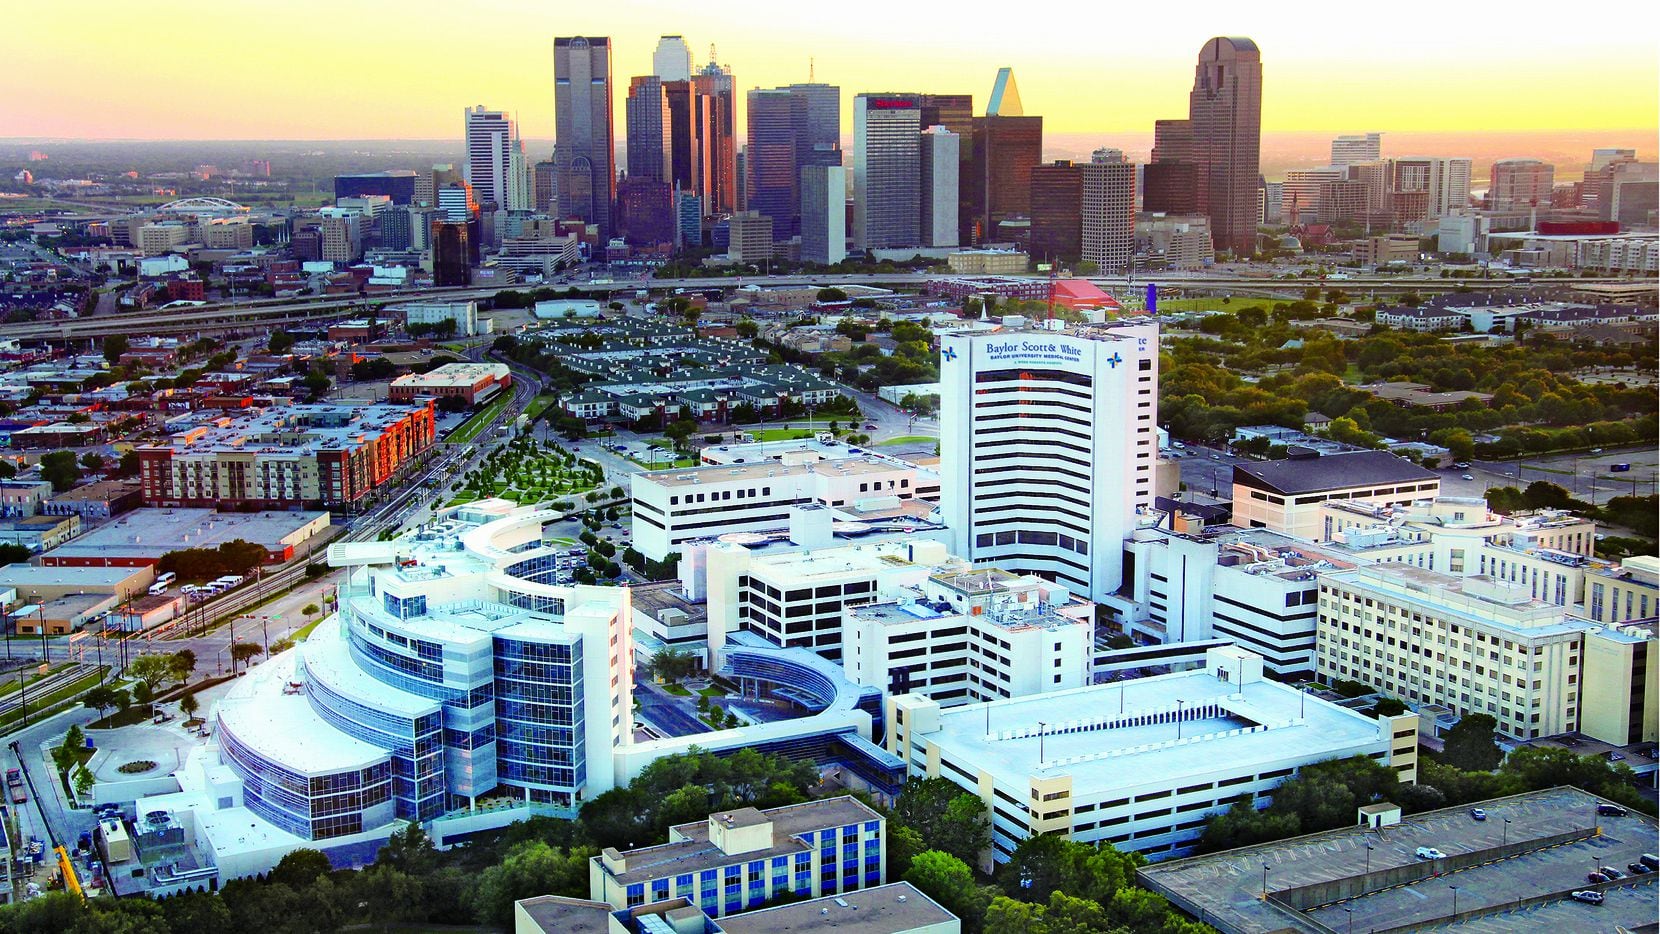 Baylor Scott & White Health’s Dallas campus, which includes Baylor University Medical Center.